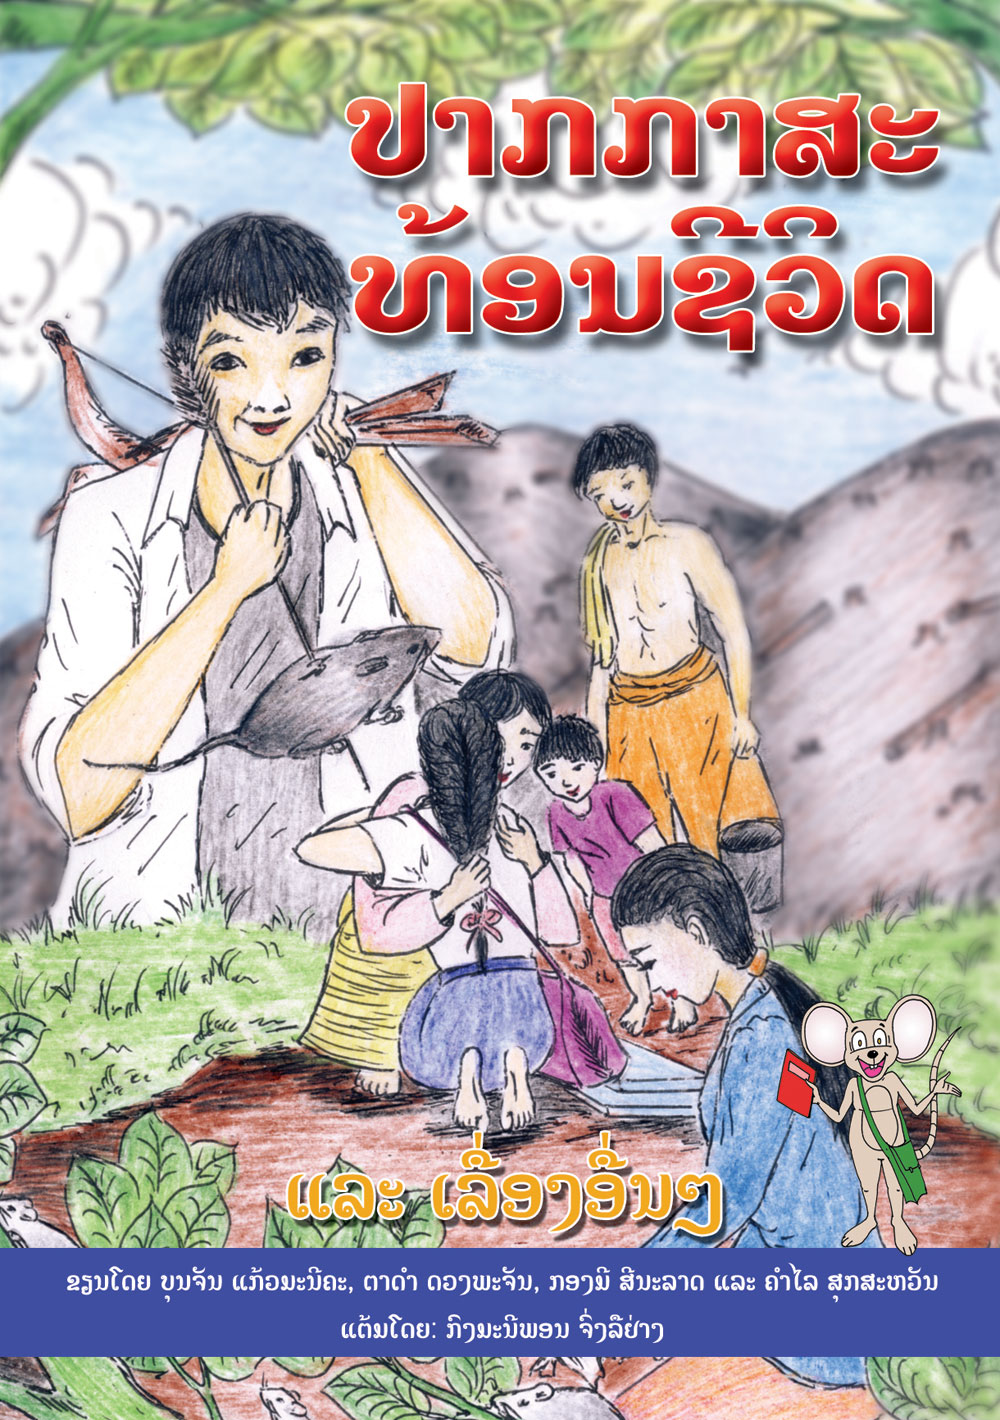 The Pen Reflects My Life large book cover, published in Lao language